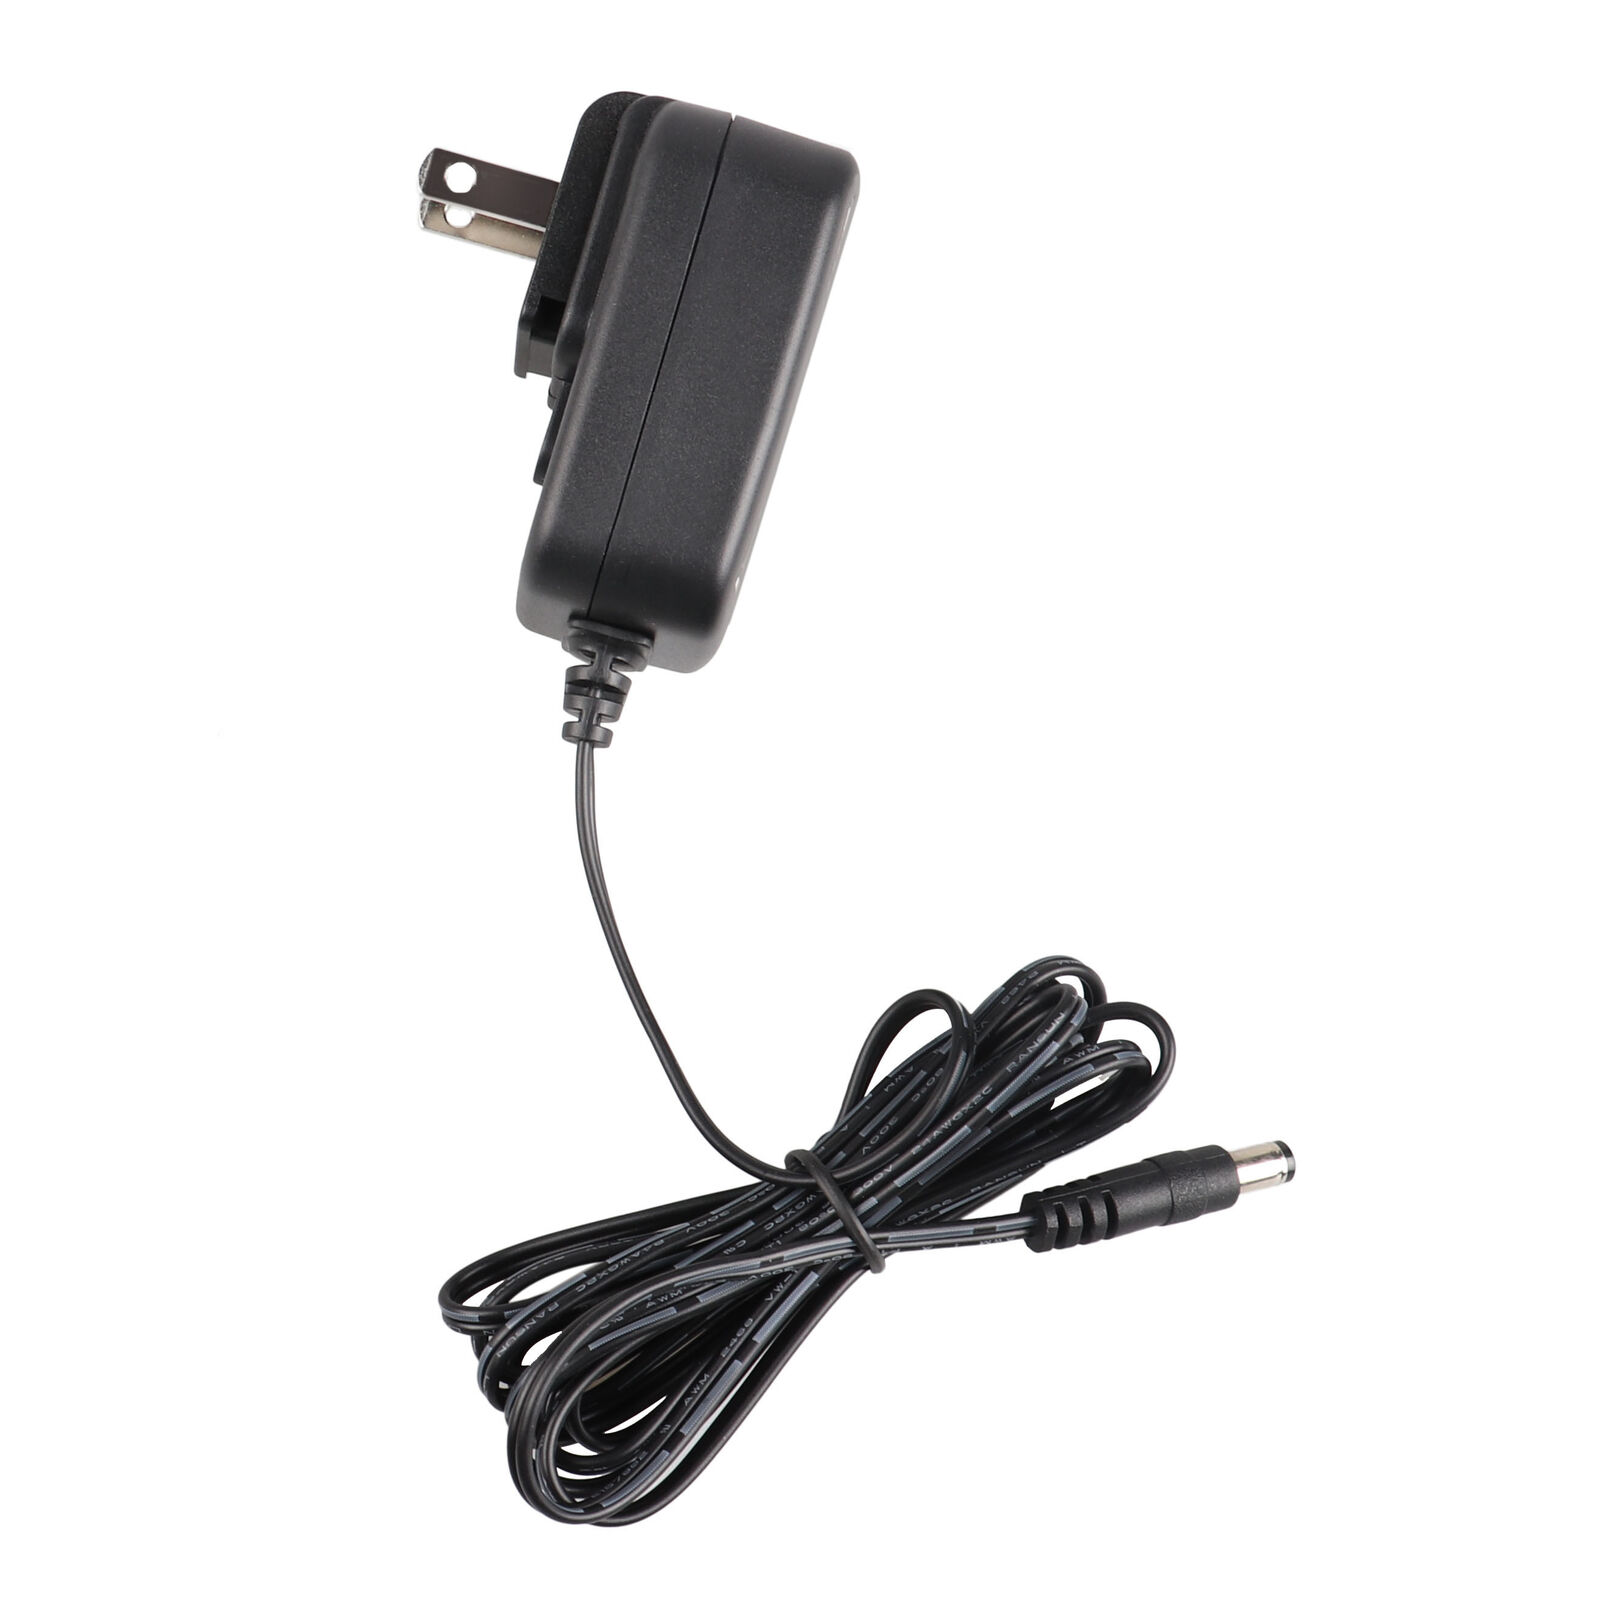 12V AC/DC Adapter For Intermec 851-061-502 AE21 851-064-106 Power Supply Charger Compatible Brand For Intermec Type AC